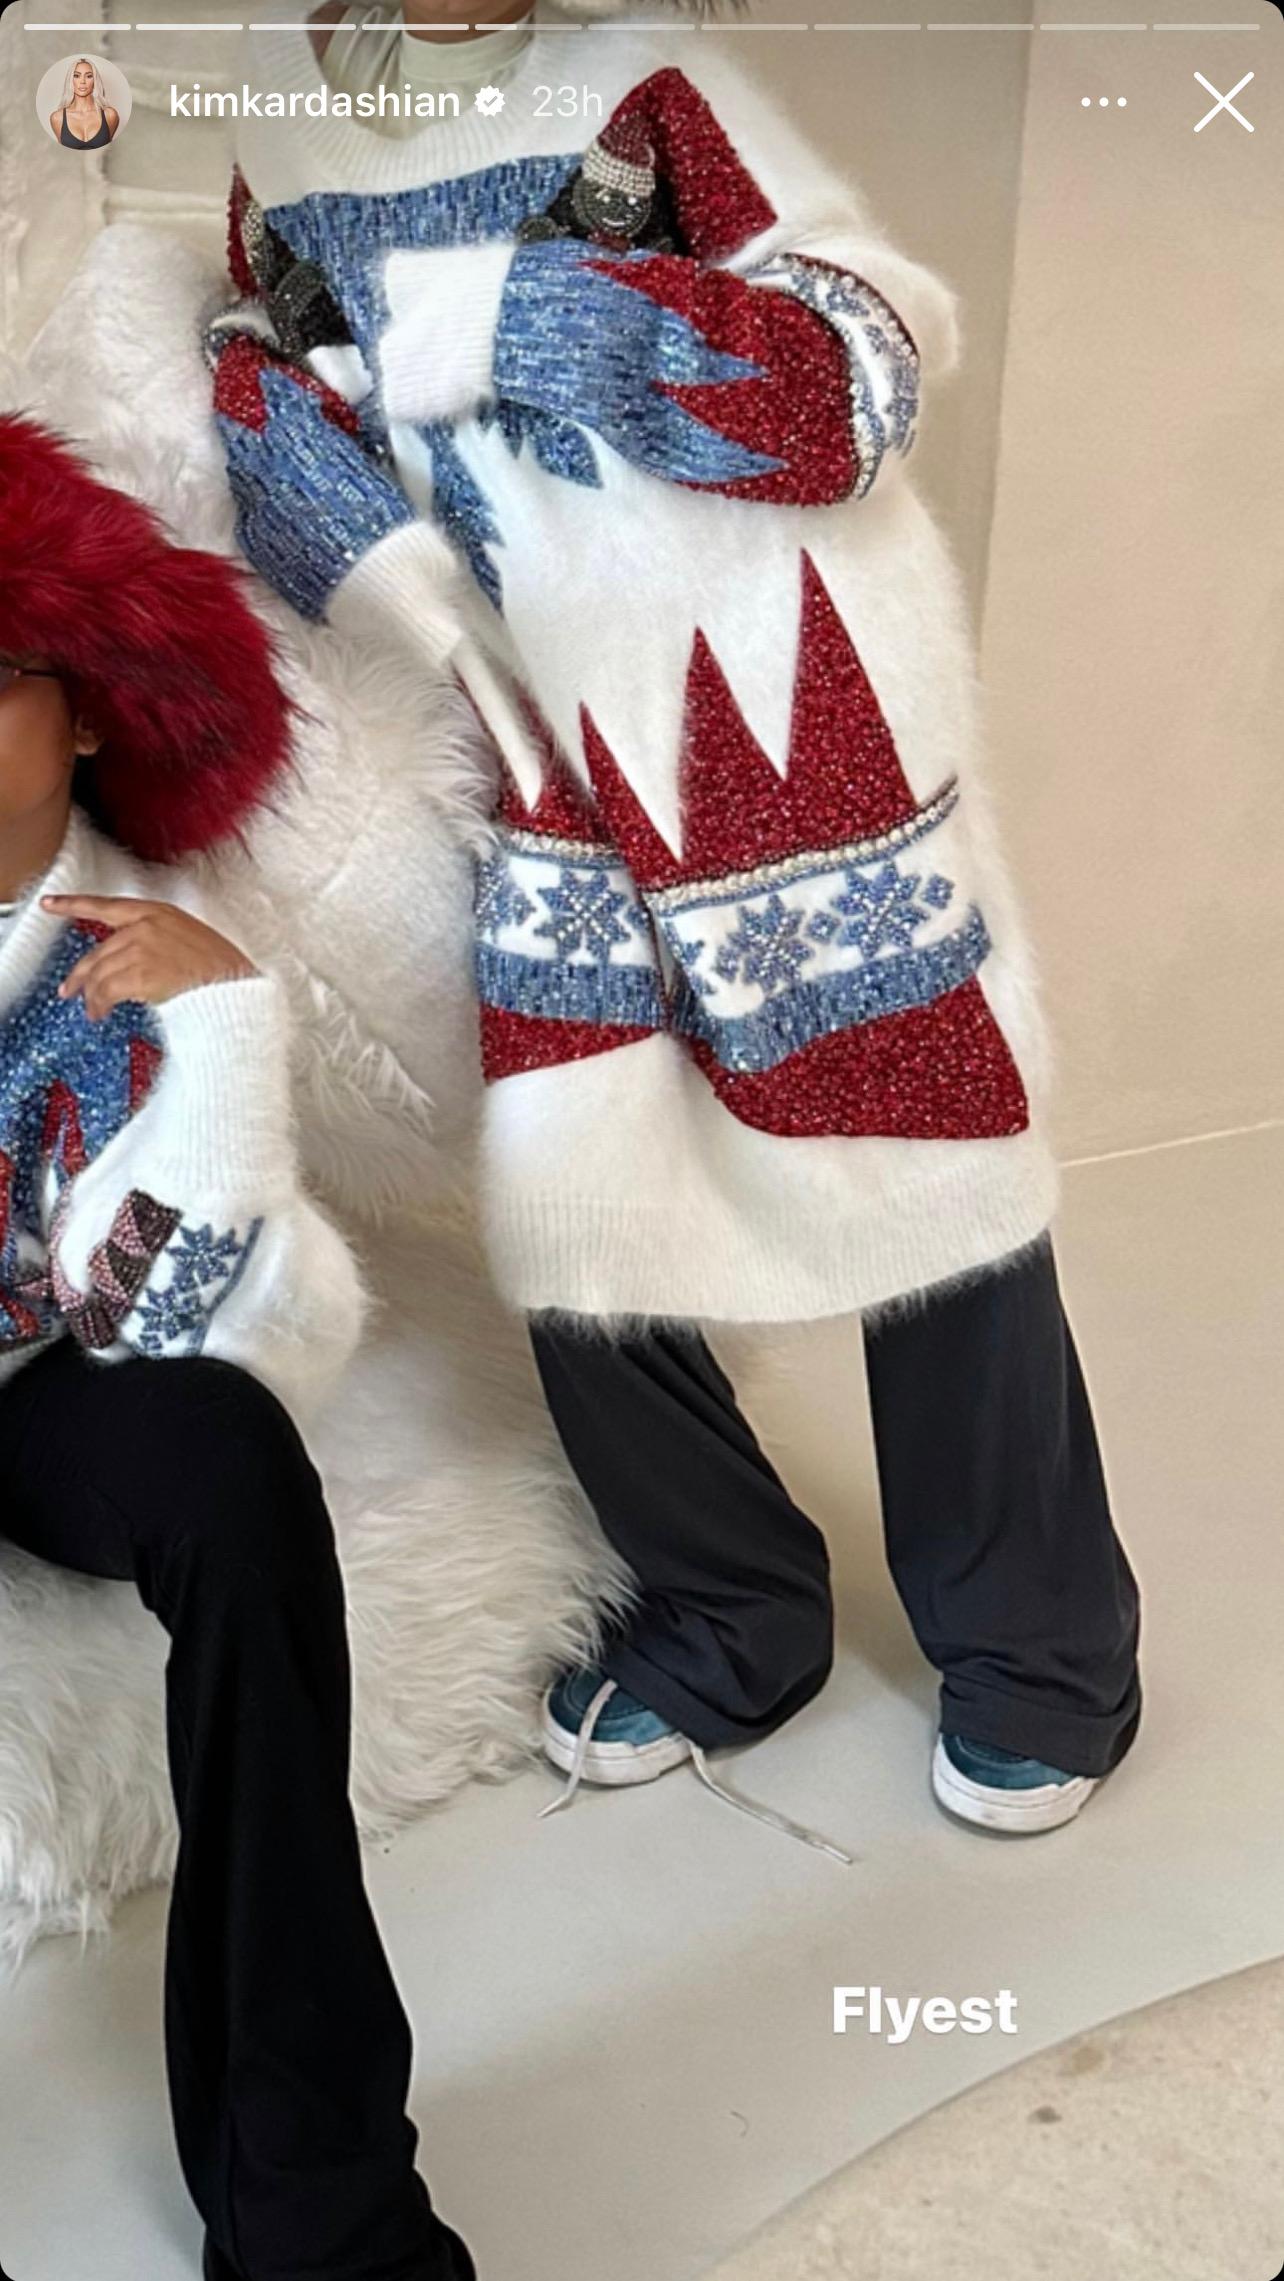 Kim Kardashian Goes All Out For Kids' Christmas Sweater Day With Blinged Outfits